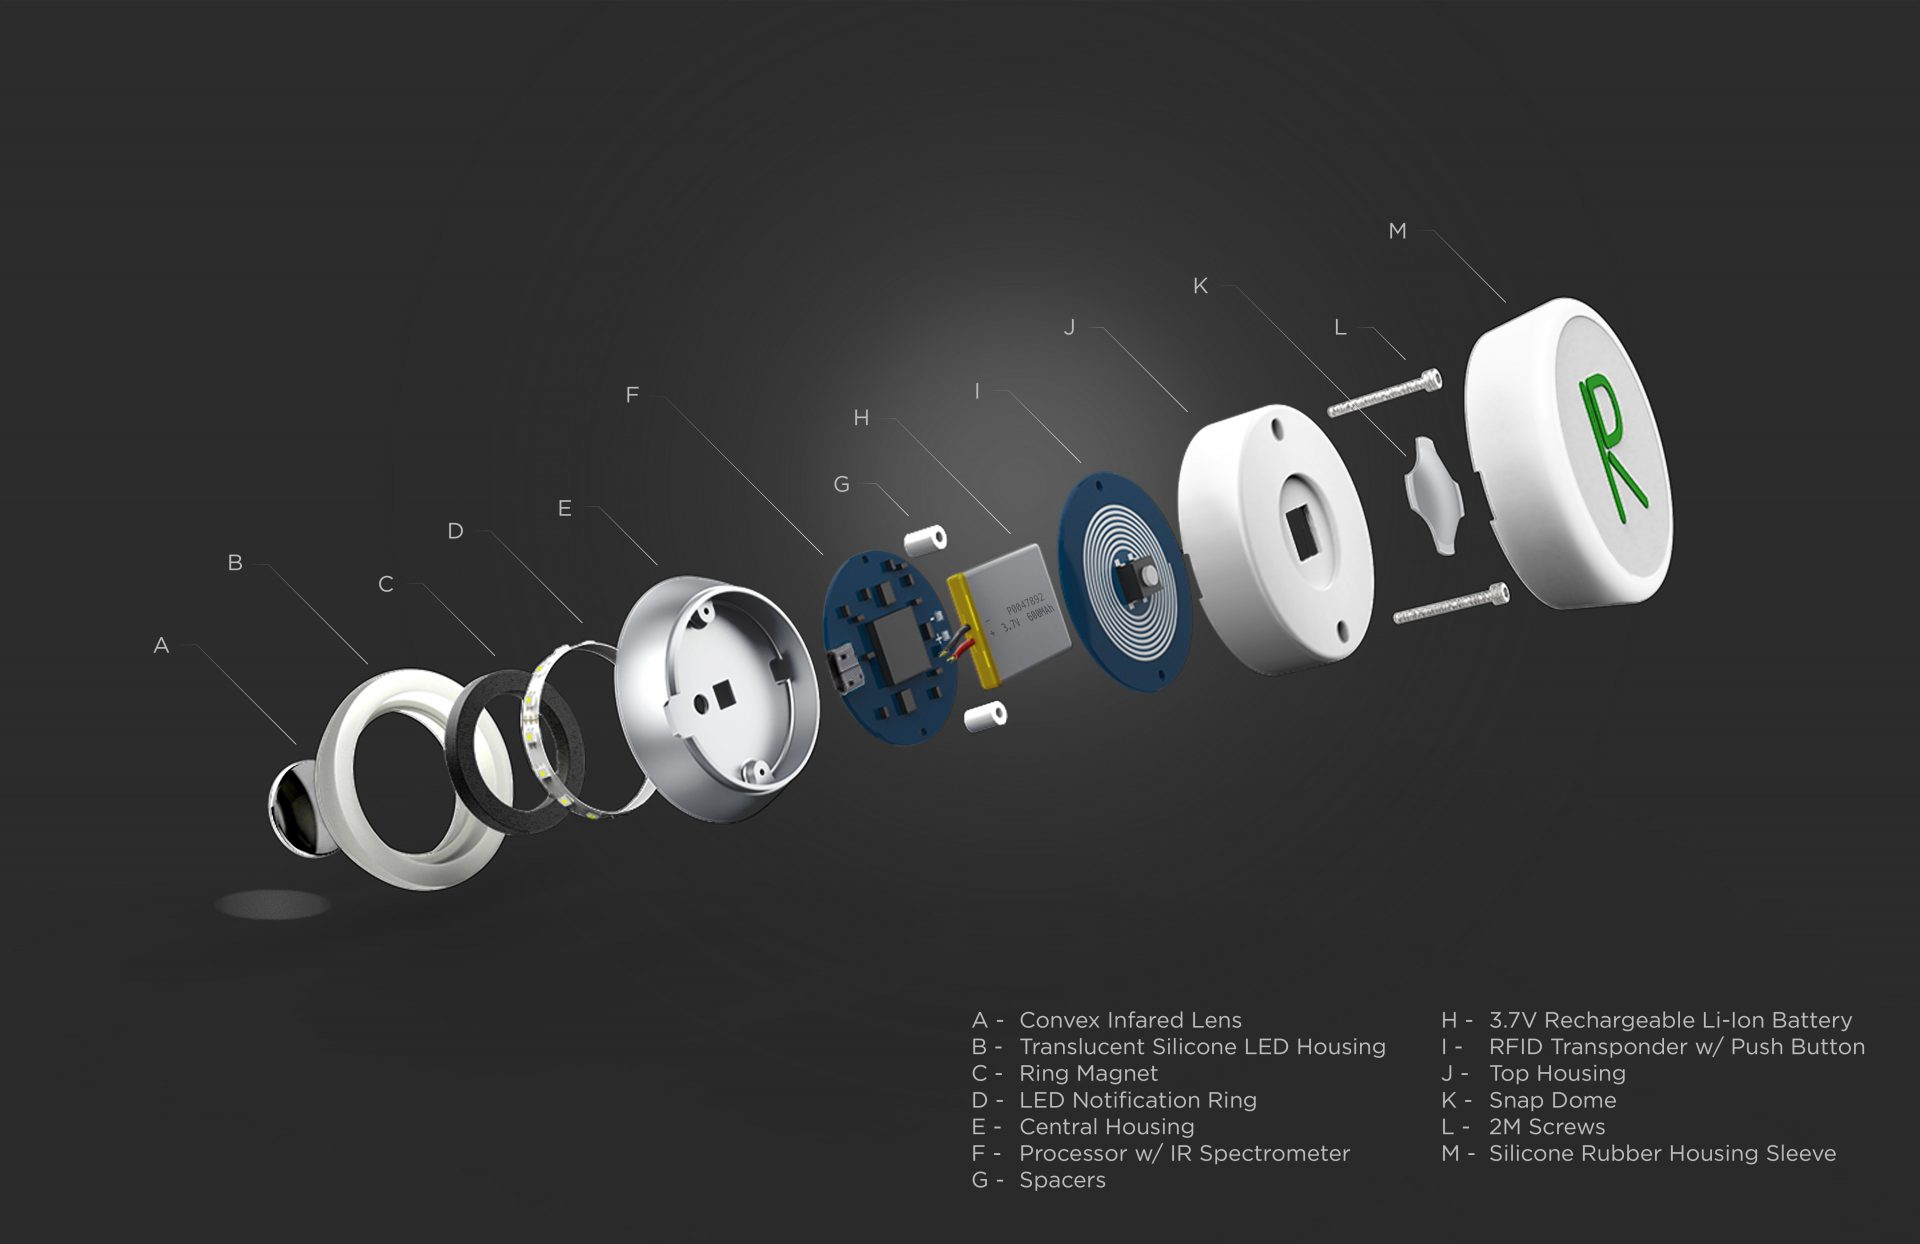 Exploded view of all the components by COHDA